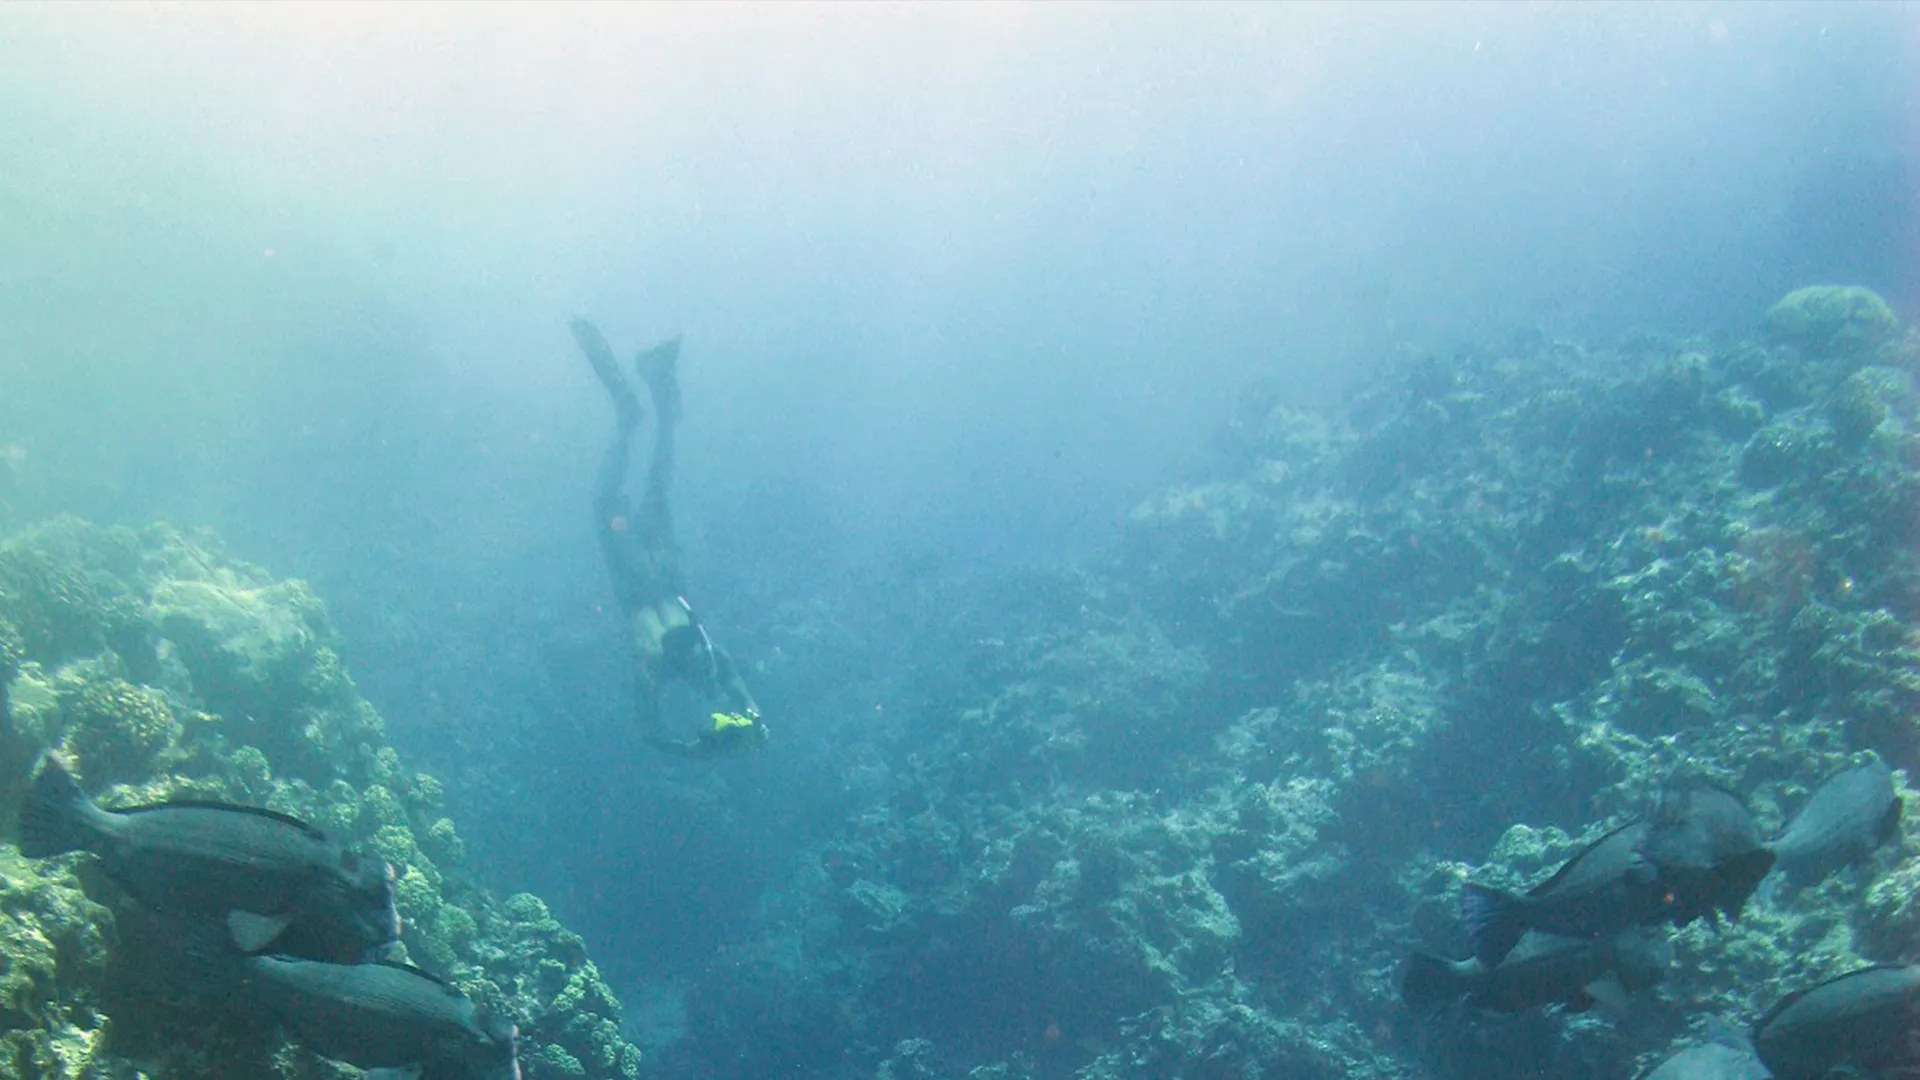 Image of a person diving